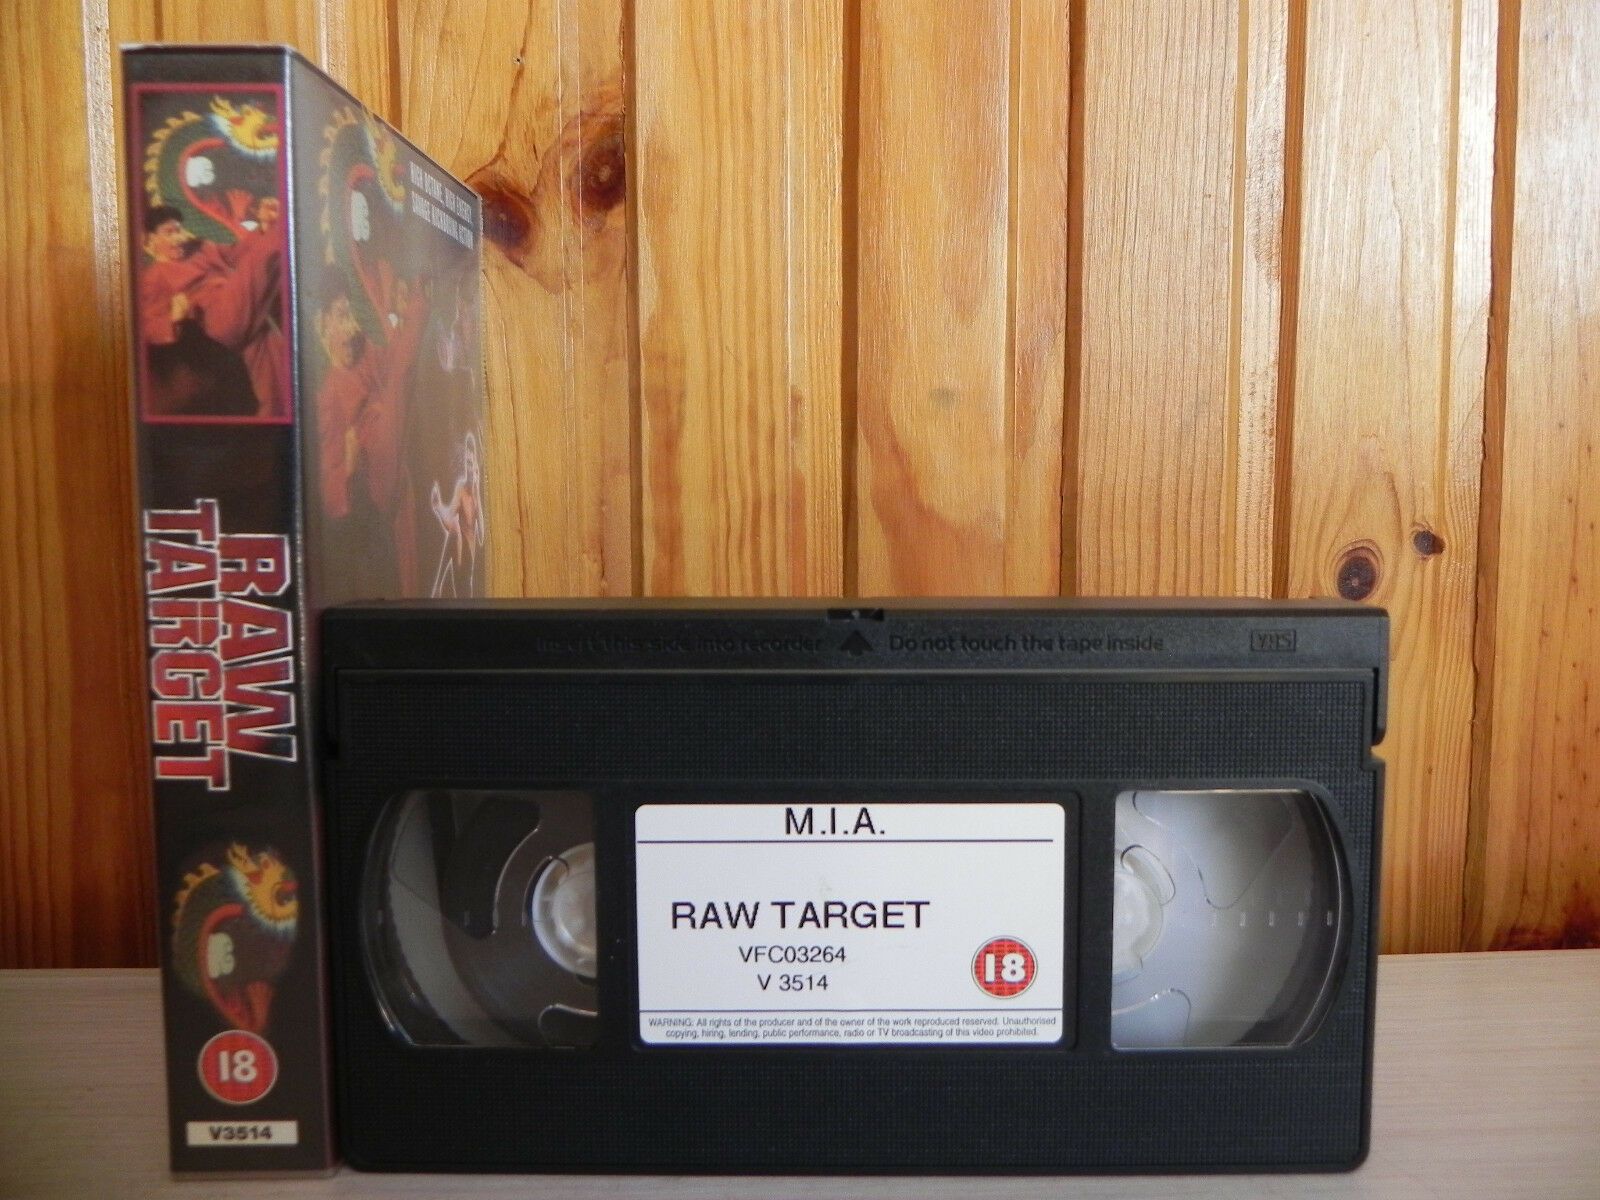 Raw Target - Dale Apollo Cook - Multi-Division Kickboxer - Wicked Action - VHS-